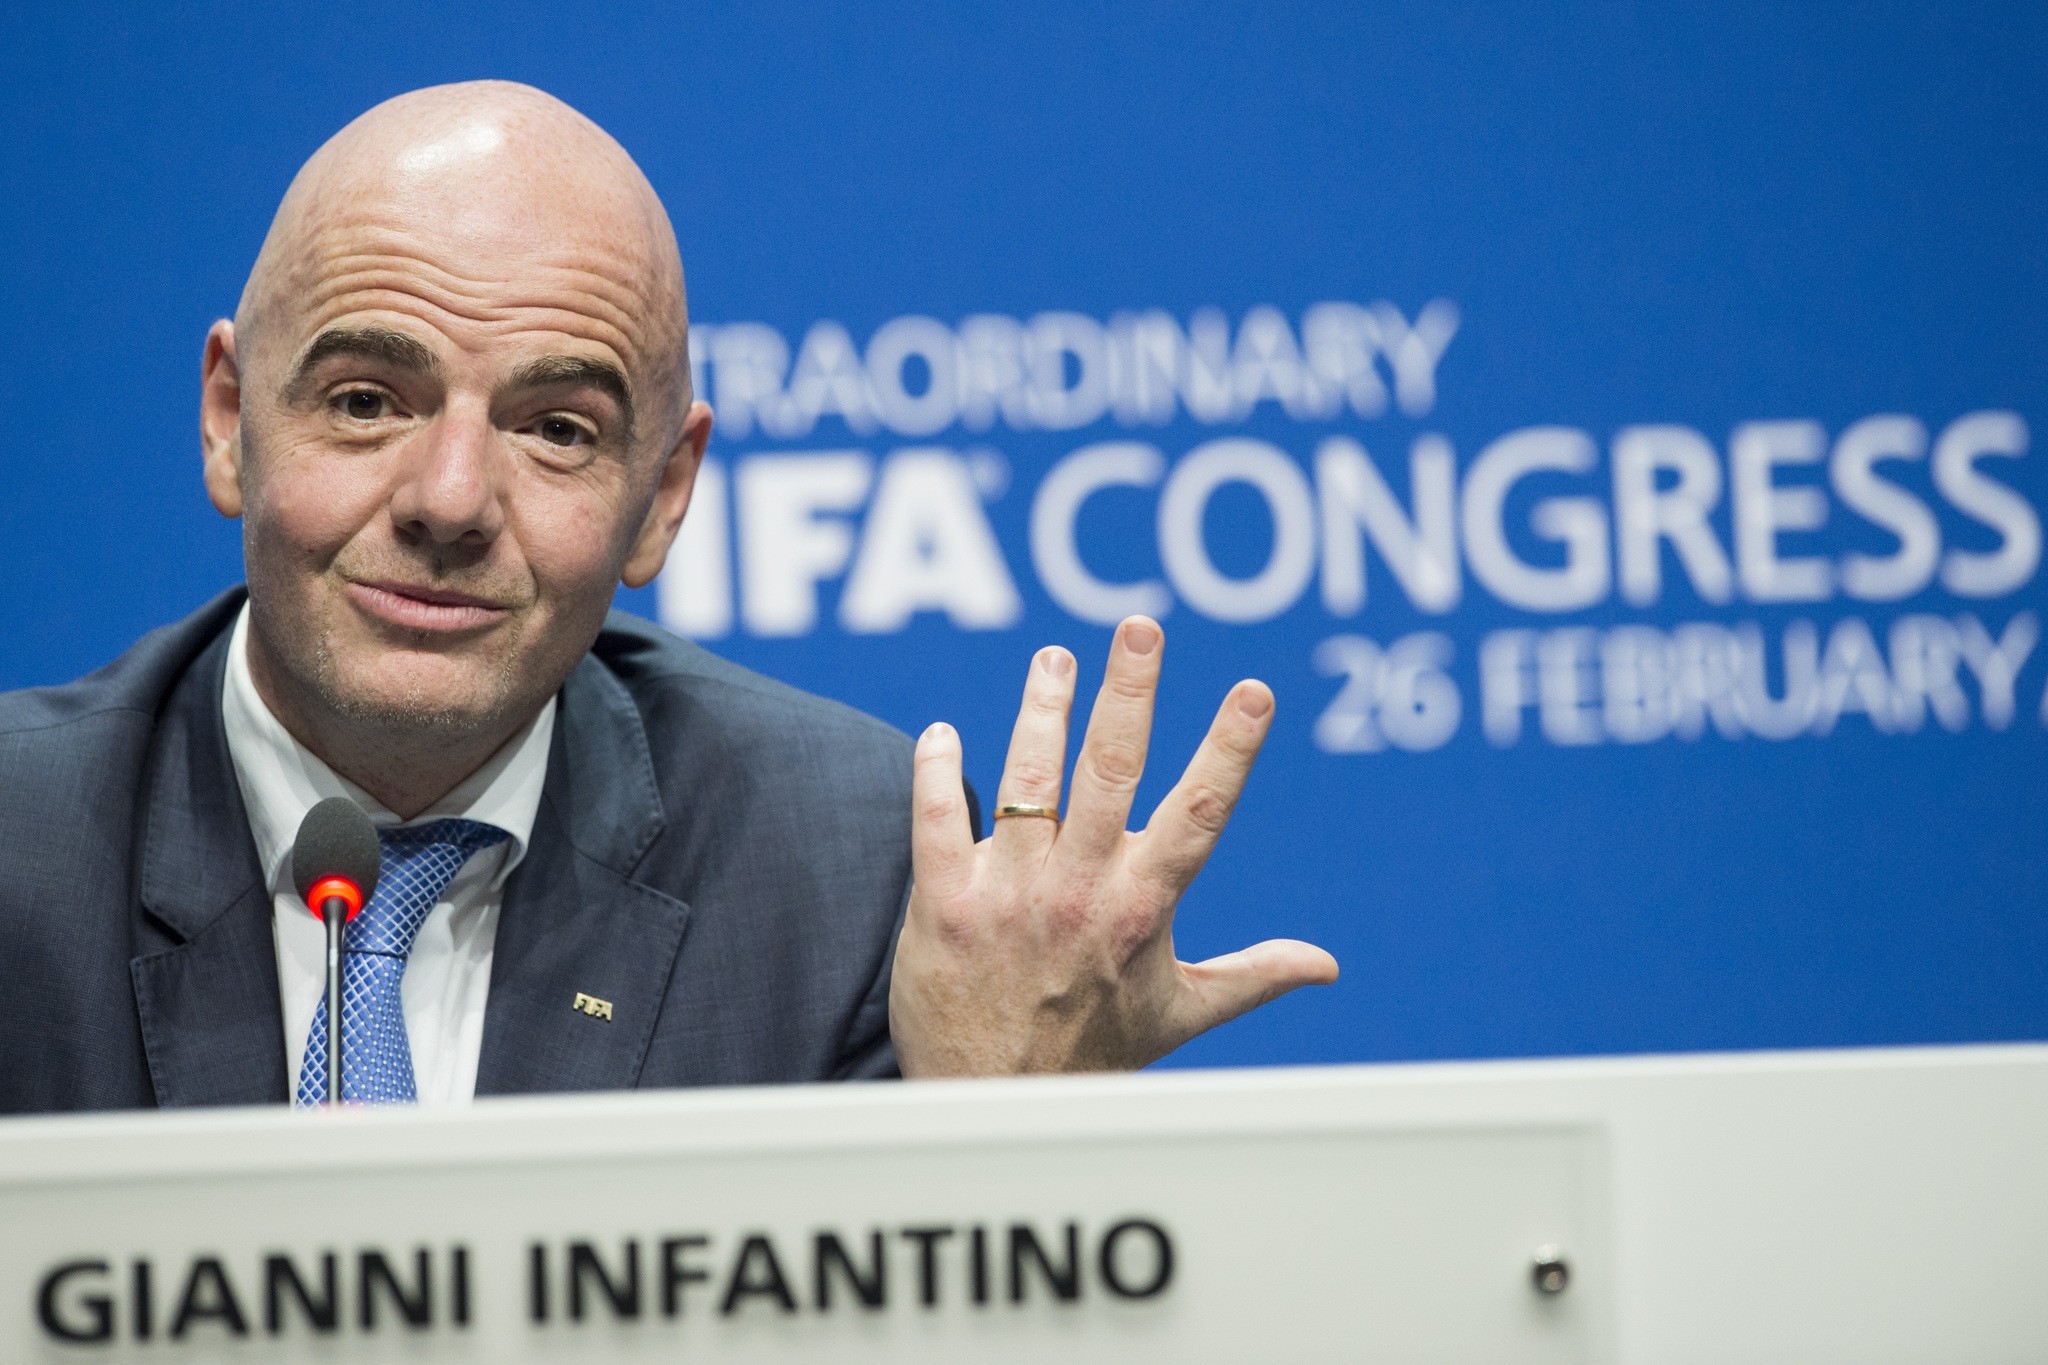 In this Feb. 26, 2016 file photo Swiss Gianni Infantino, then new FIFA President, smiles during the press conference after being elected, at the Extraordinary FIFA Congress 2016 in Zurich, Switzerland. (AP Photo)